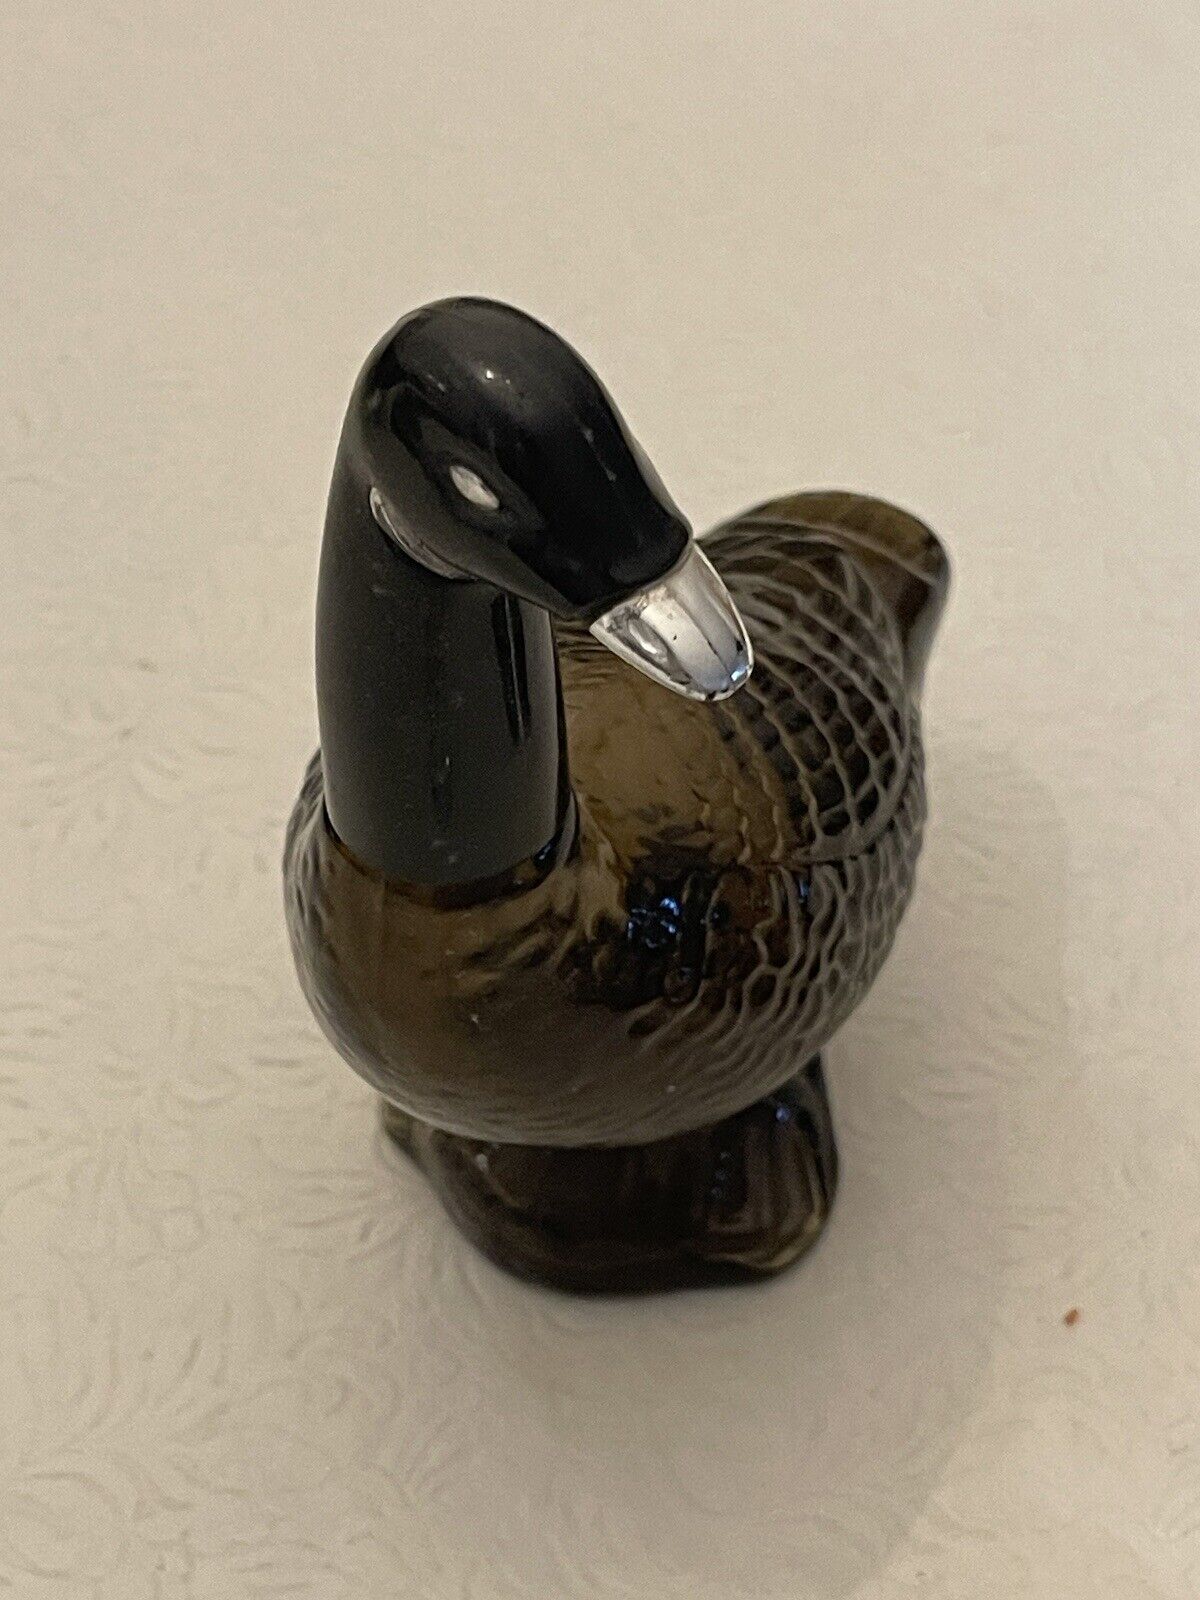 Vintage Avon Canada Goose Cologne Perfume Bottle Wild Country Empty Glass